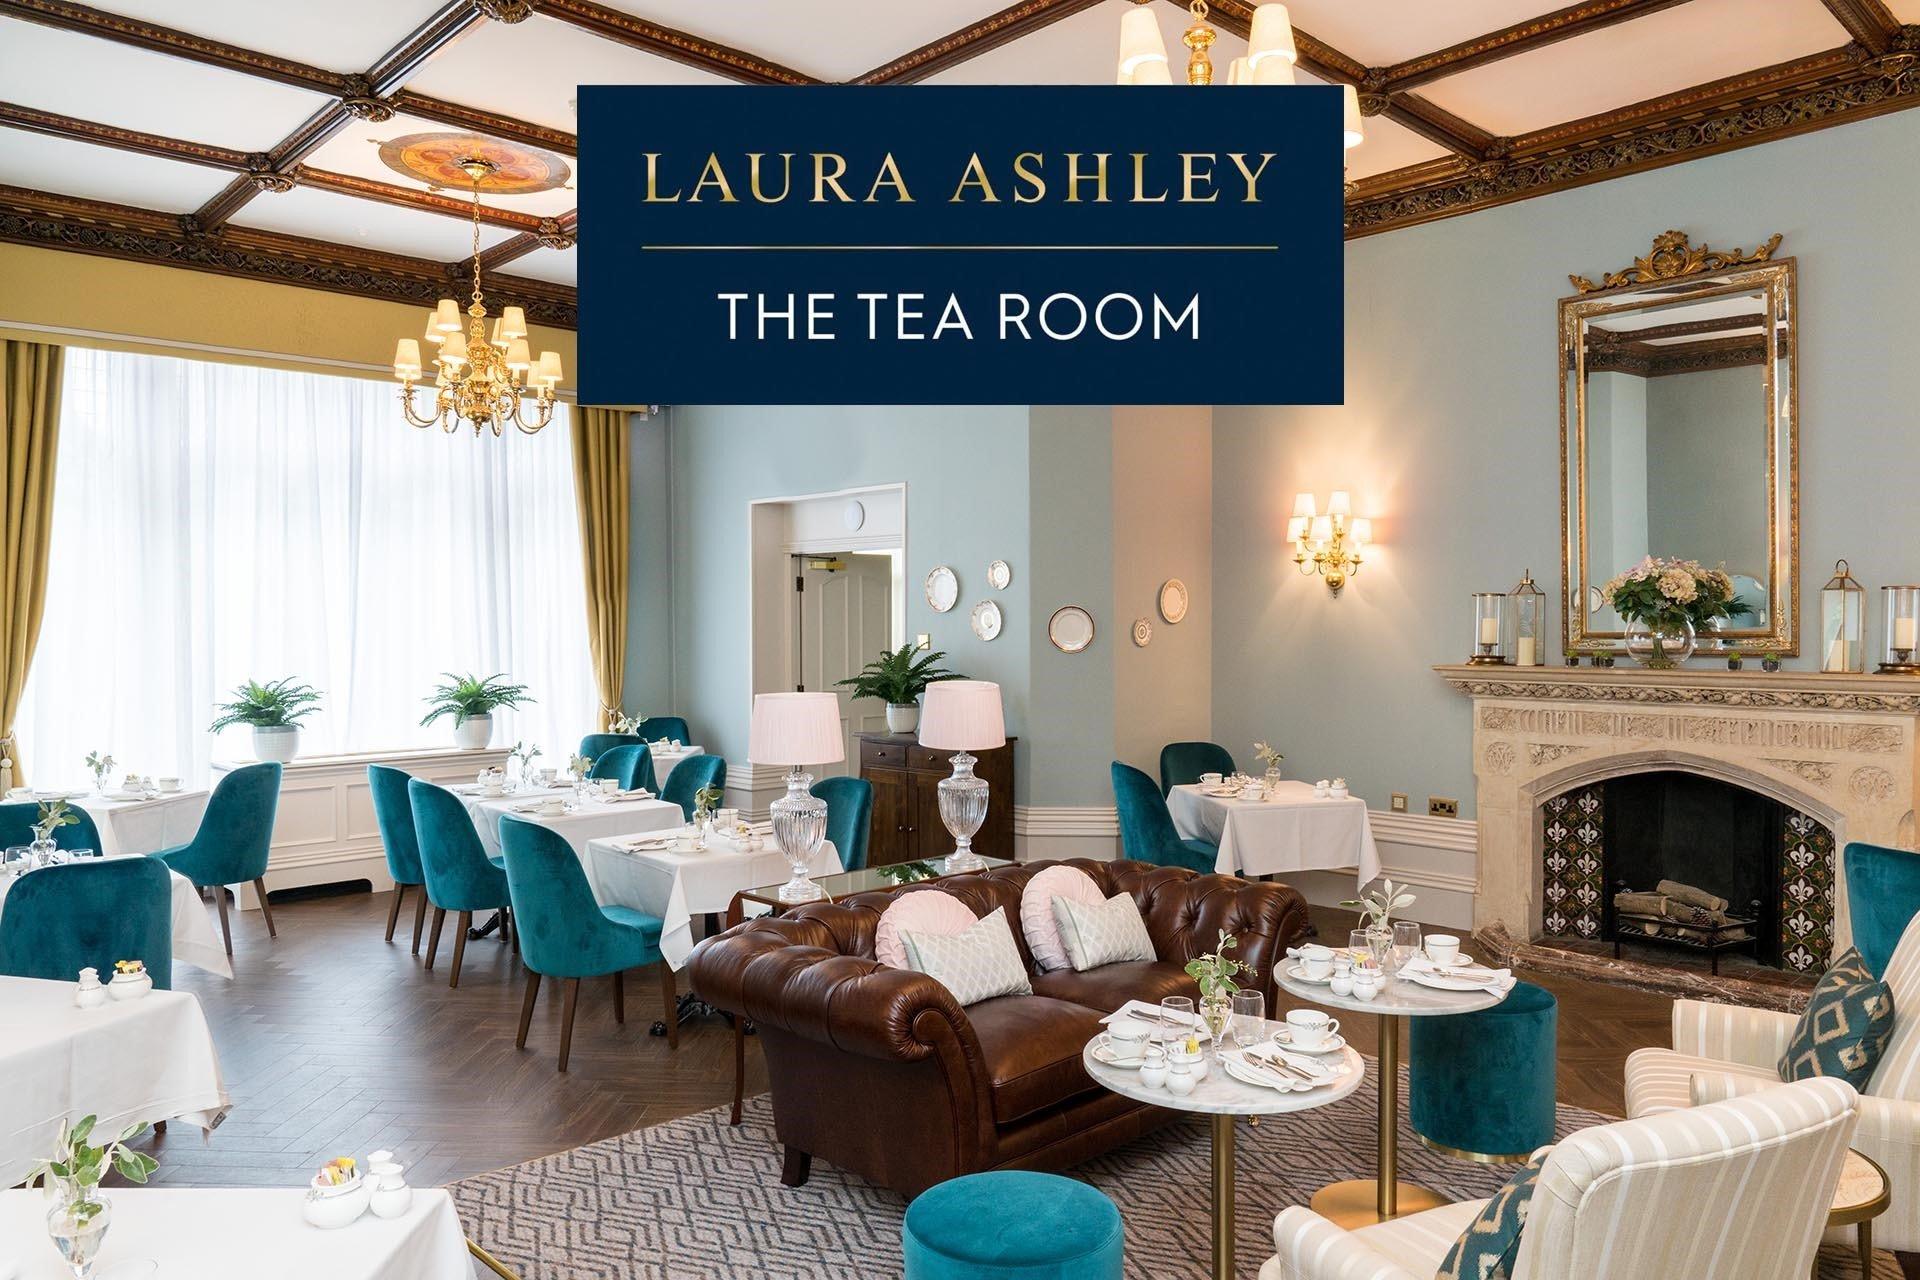 All About Laura Ashley Tea Room